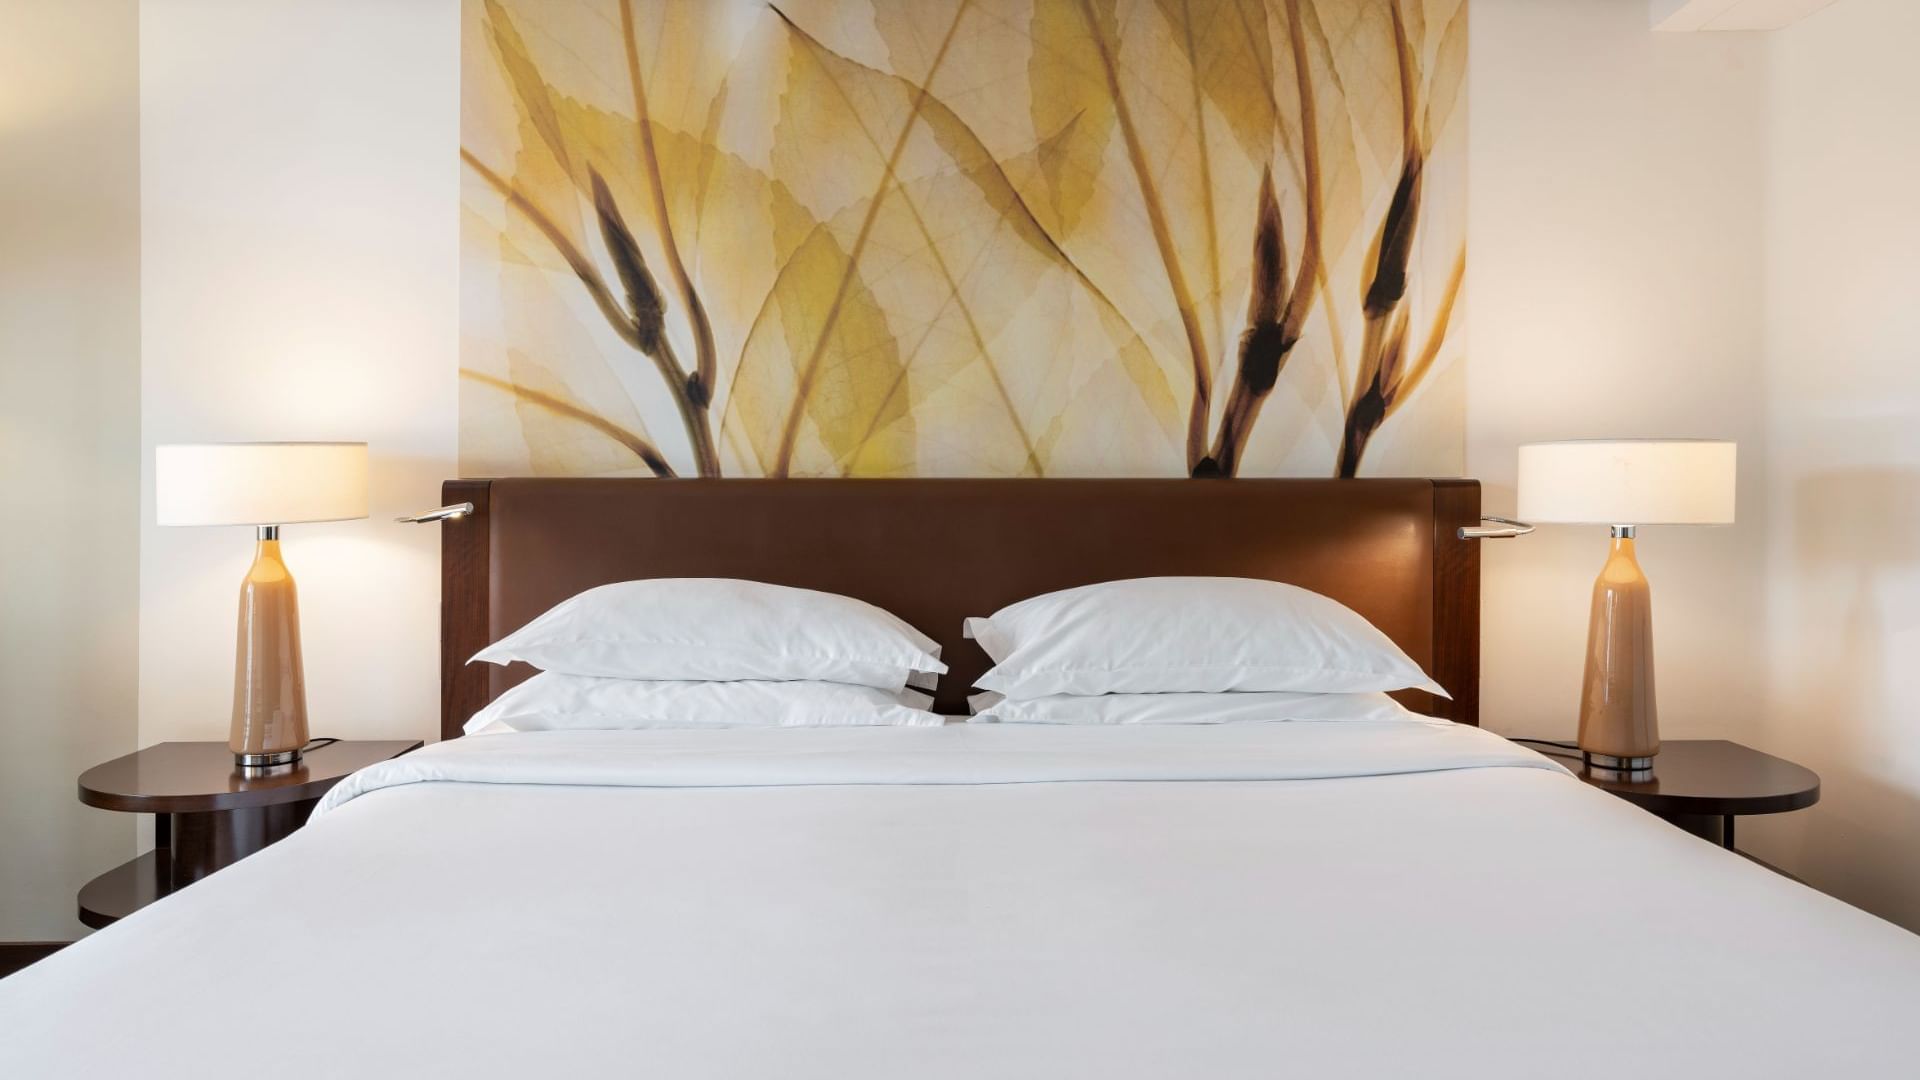 Bed & nightlamps in garden view  at Bensaude Hotels Collection